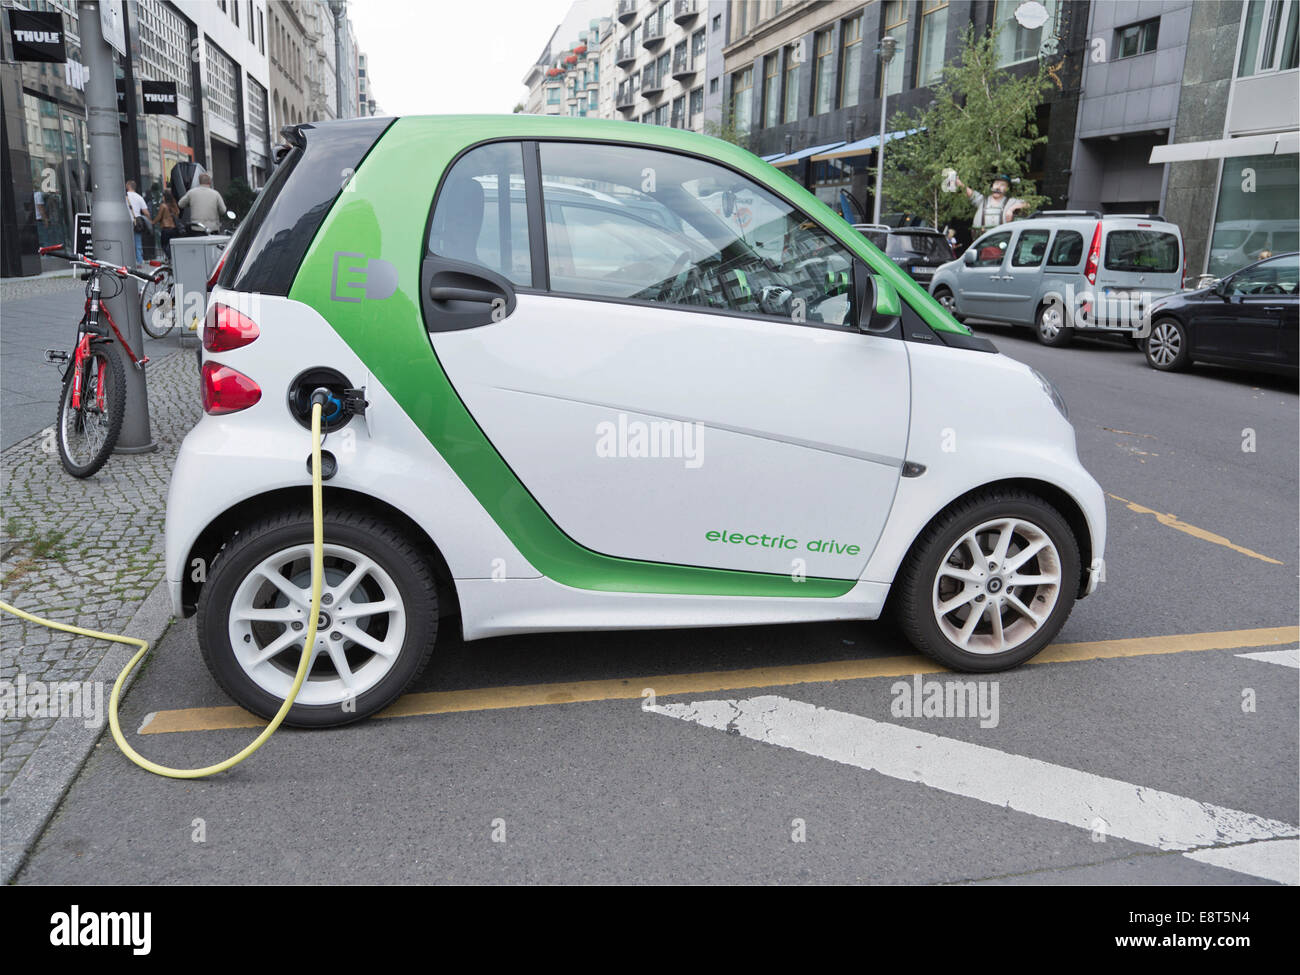 Electric car, charging station, Berlin, Germany Stock Photo